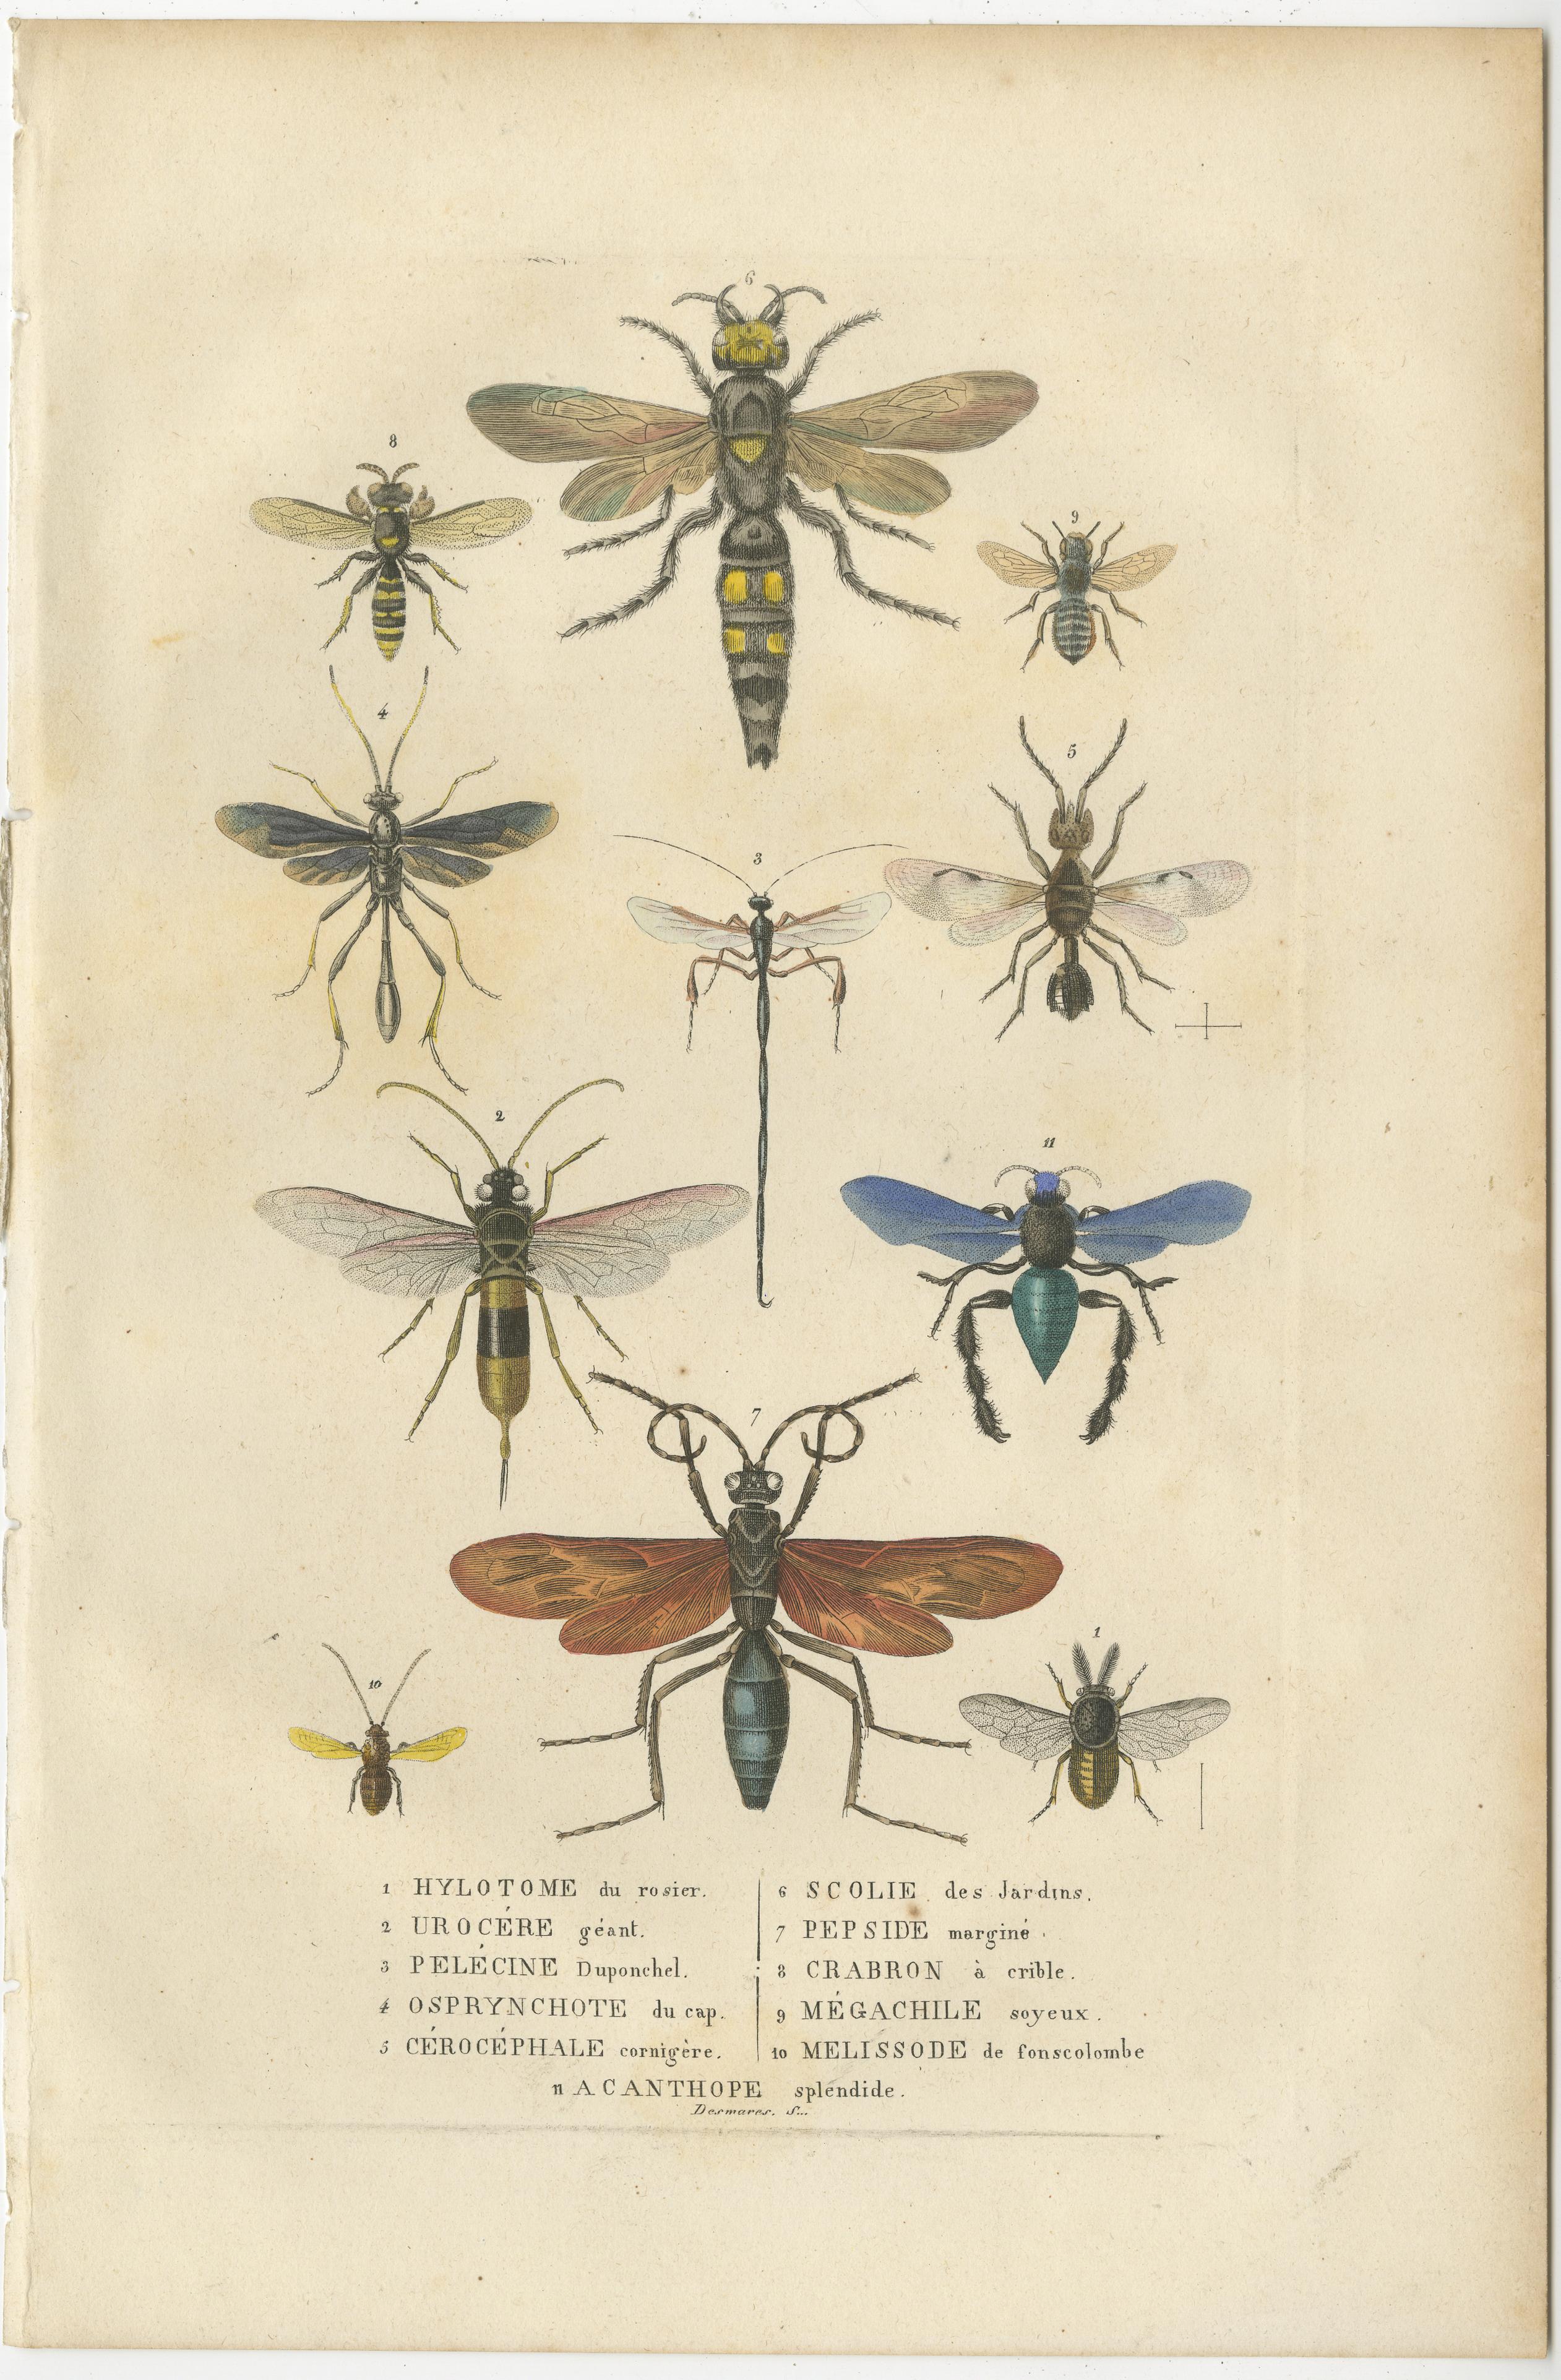 The engraving is a meticulously handcolored illustration from 1845, showcasing a collection of hymenopterans, which includes various bees and wasps. It features eleven different species, each labeled with its scientific name in French. The subjects